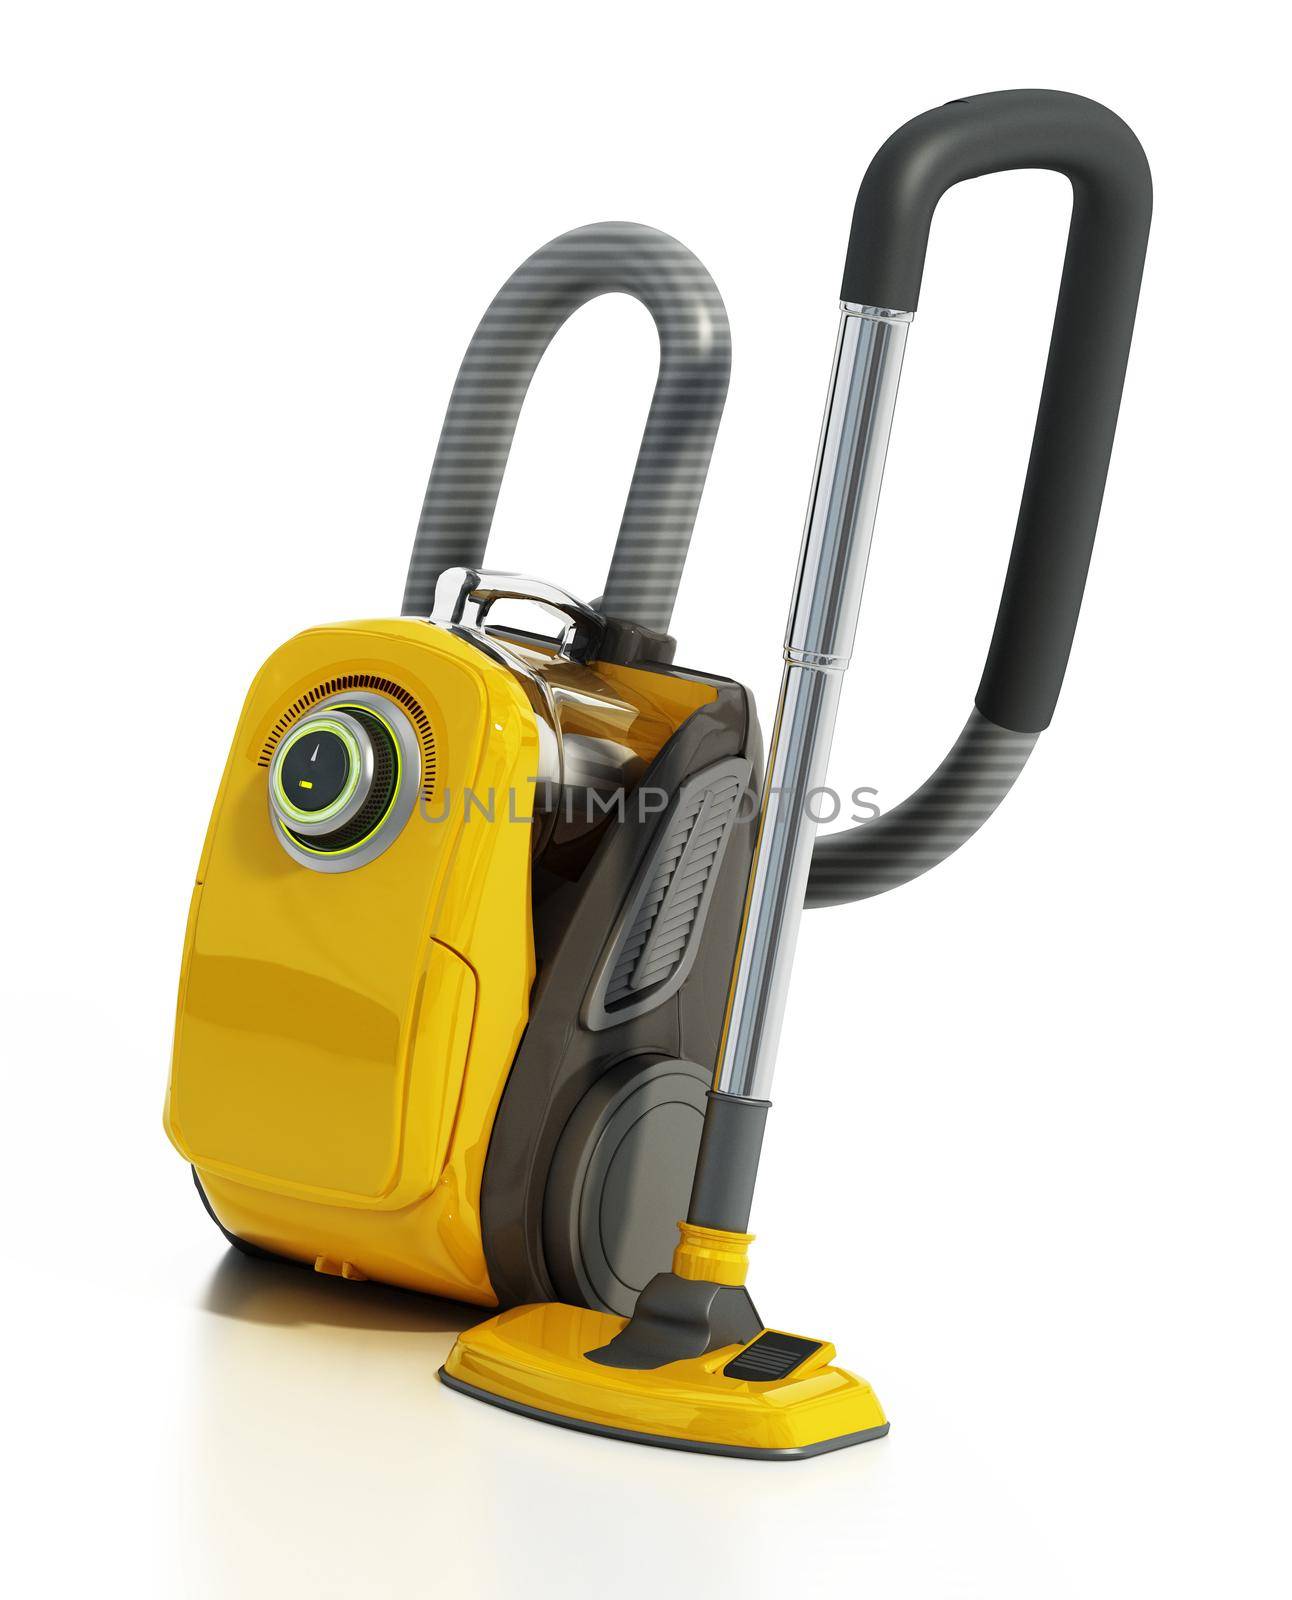 Vacuum cleaner isolated on white background. 3D illustration.